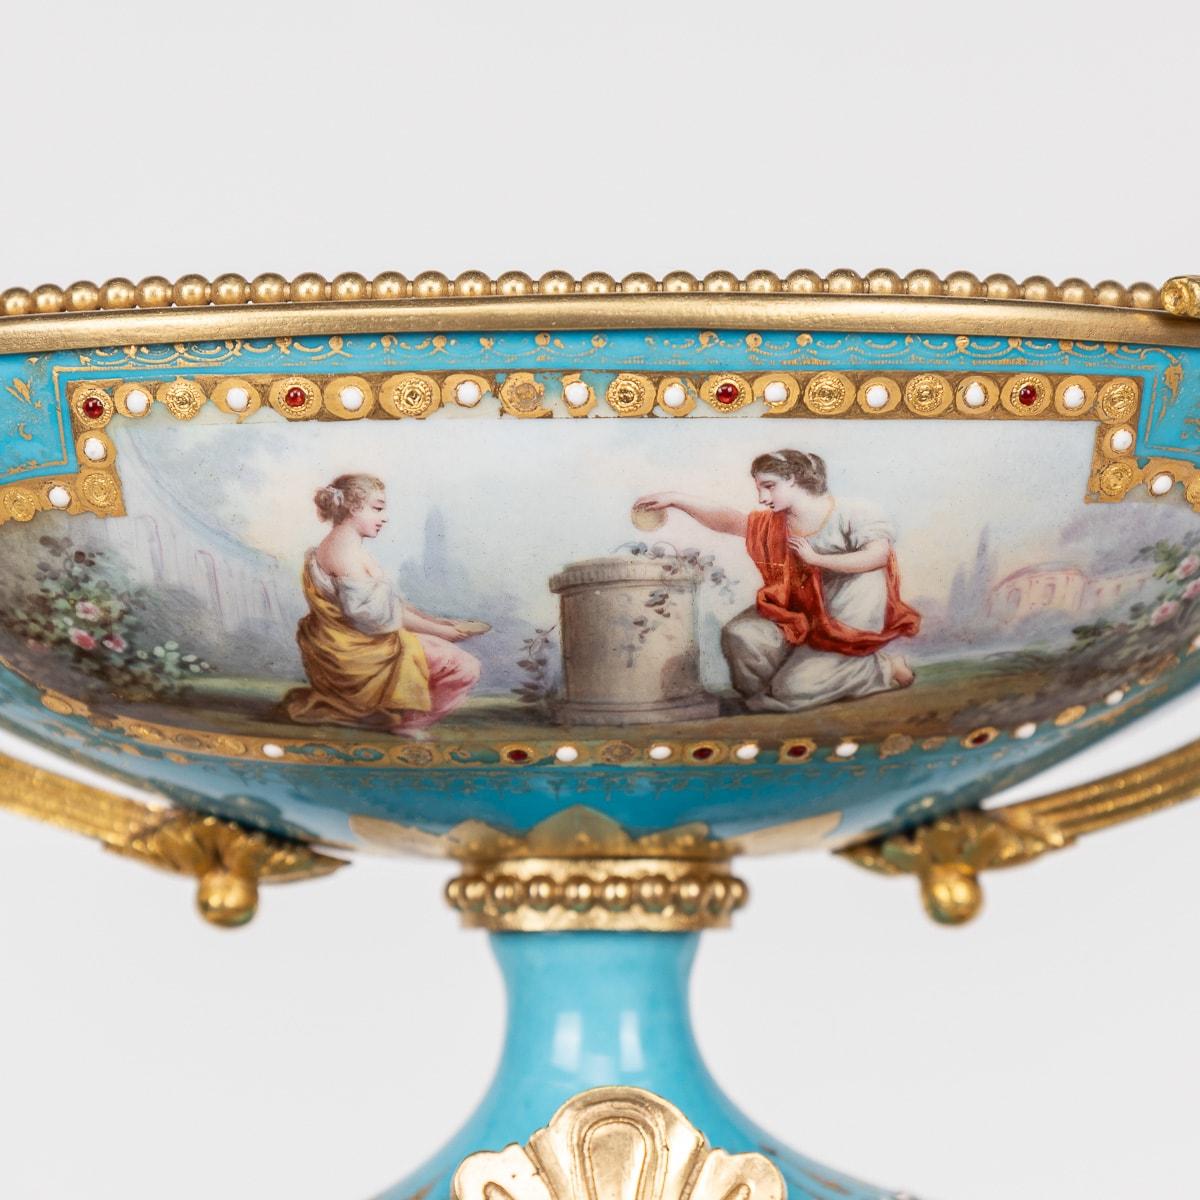 19th Century French Ormolu Mounted Sevres Style Porcelain Mantle Clock c.1870 For Sale 10